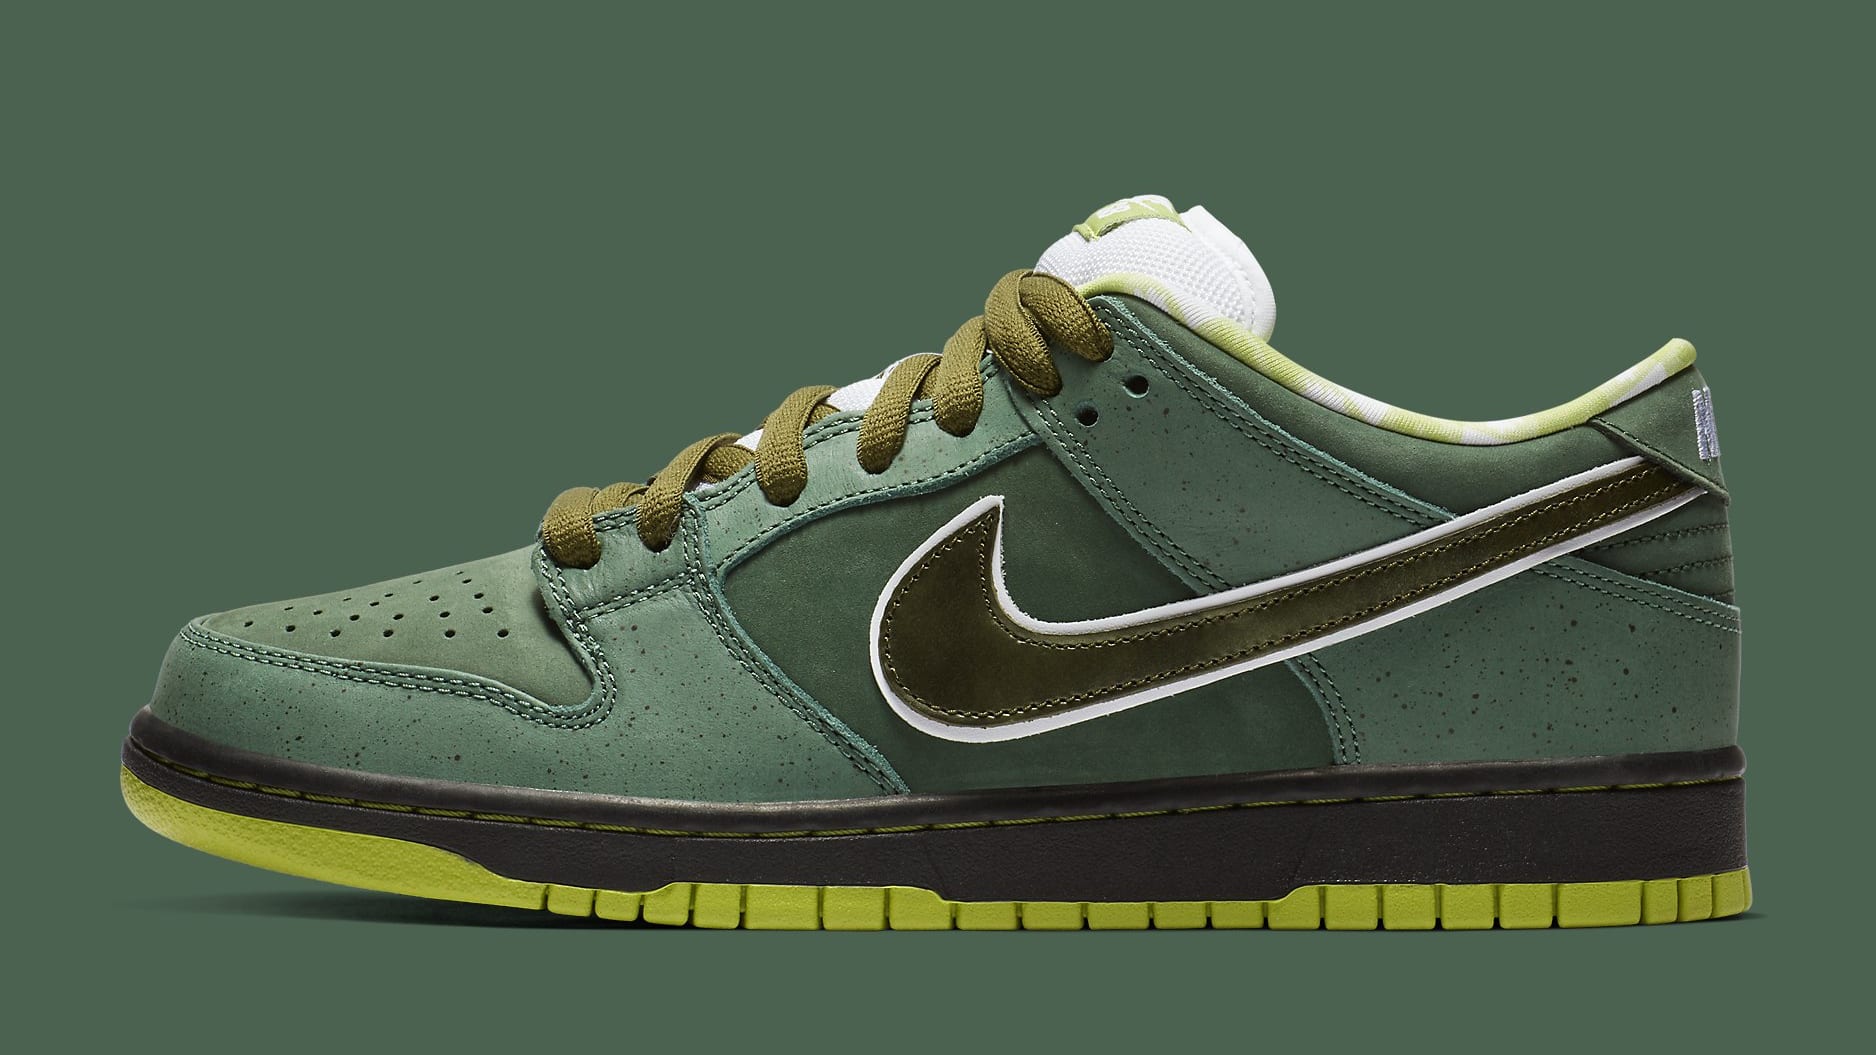 concepts nike sb green lobster